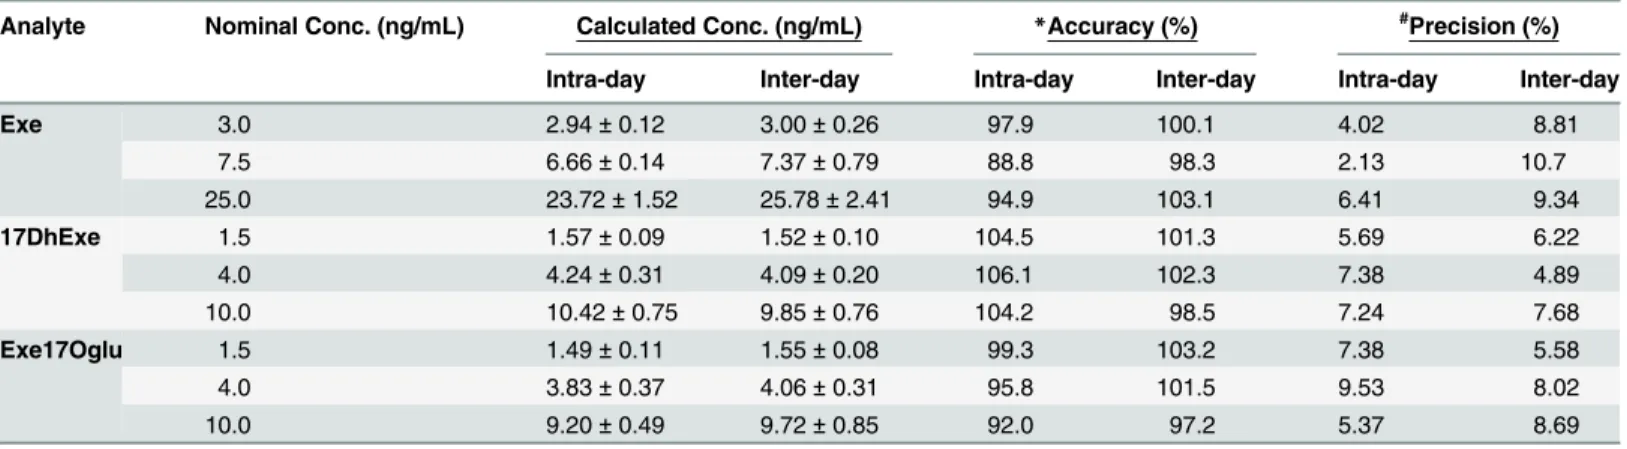 Table 1. Intra-run and inter-run concentrations, accuracy and precision of QC samples for Exe, 17DhExe and Exe17Oglu.